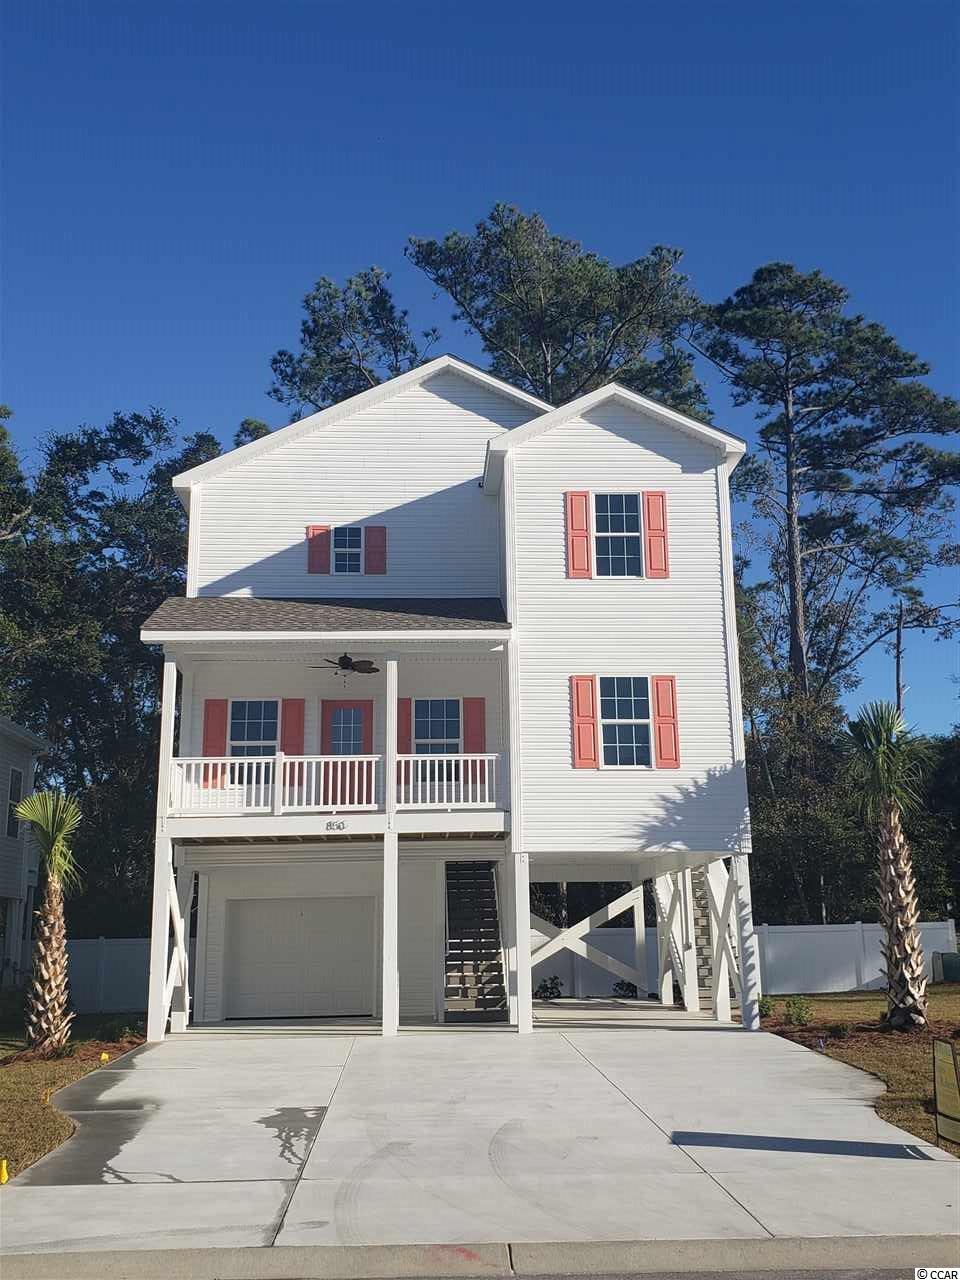 850 9th Ave. S North Myrtle Beach, SC 29582